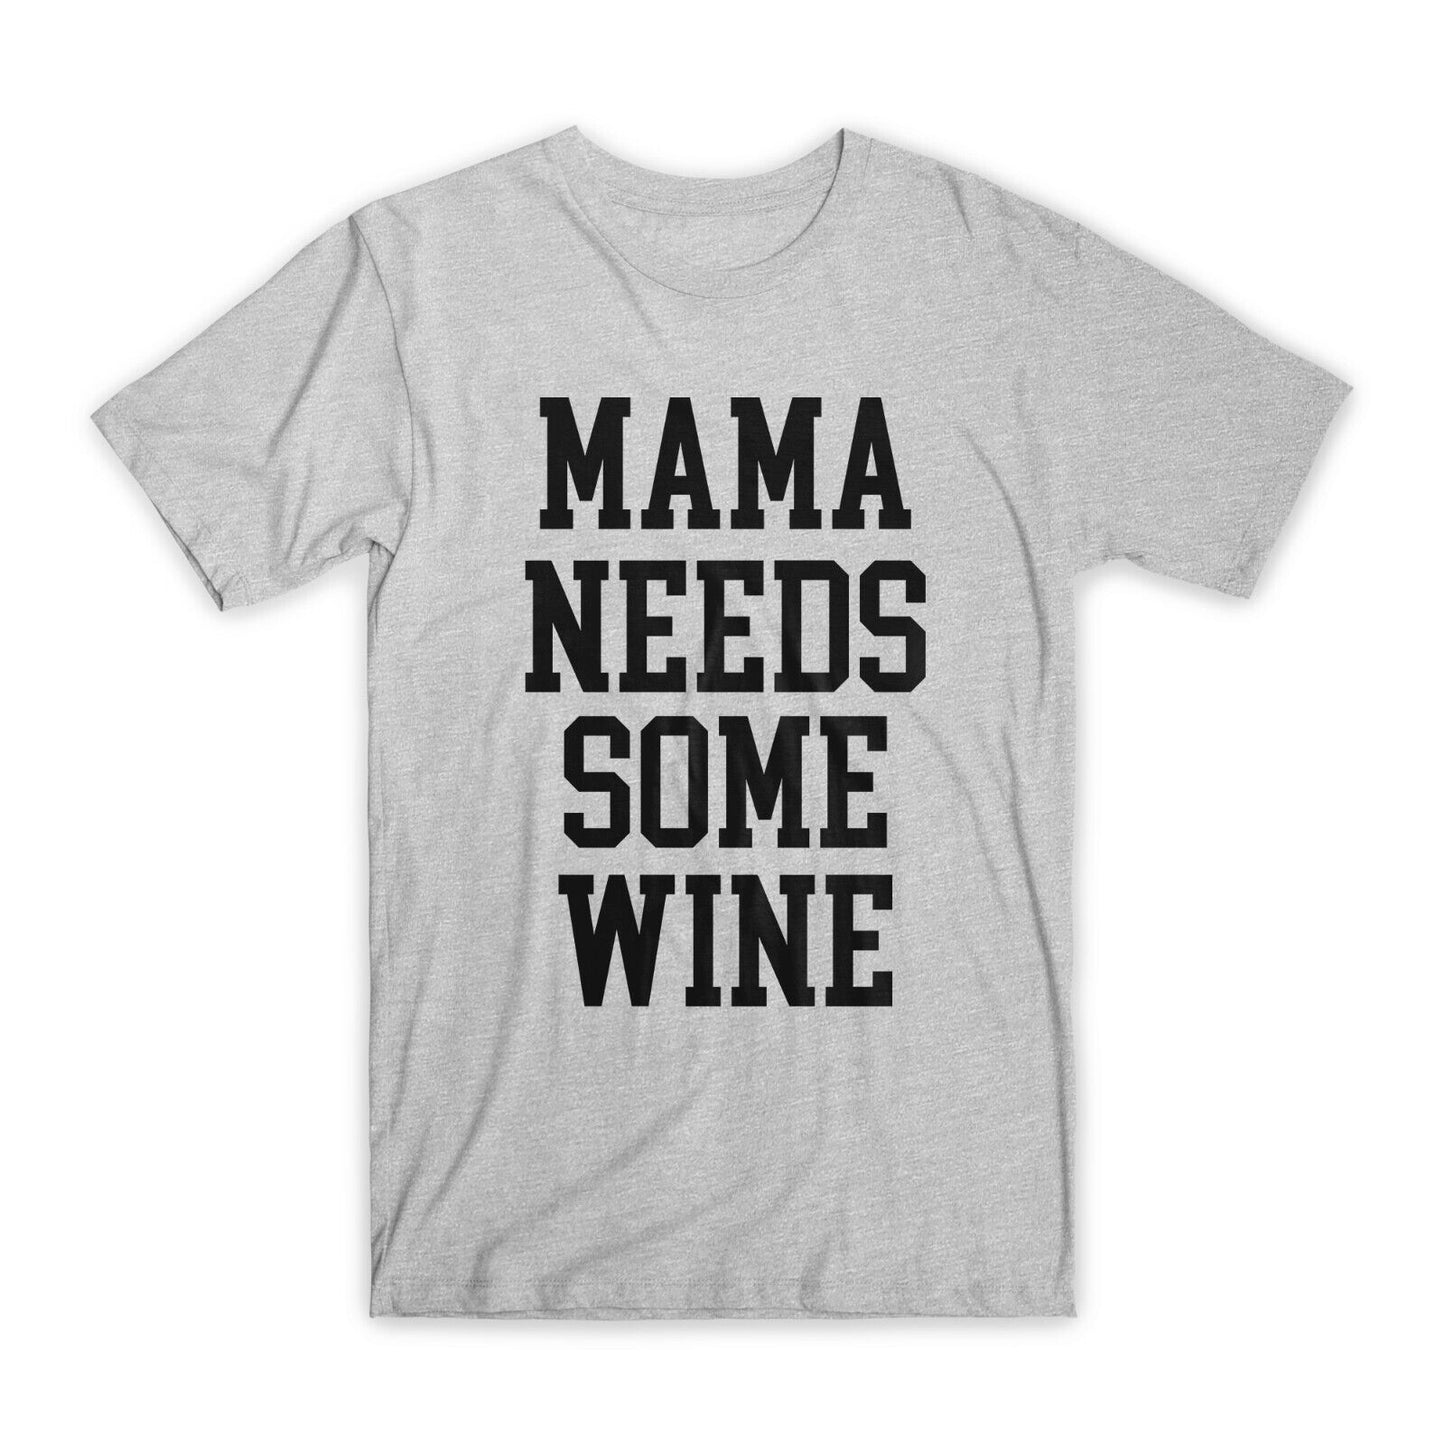 Mama Needs Some Wine T-Shirt Premium Soft Cotton Crew Neck Funny Tees Gifts NEW